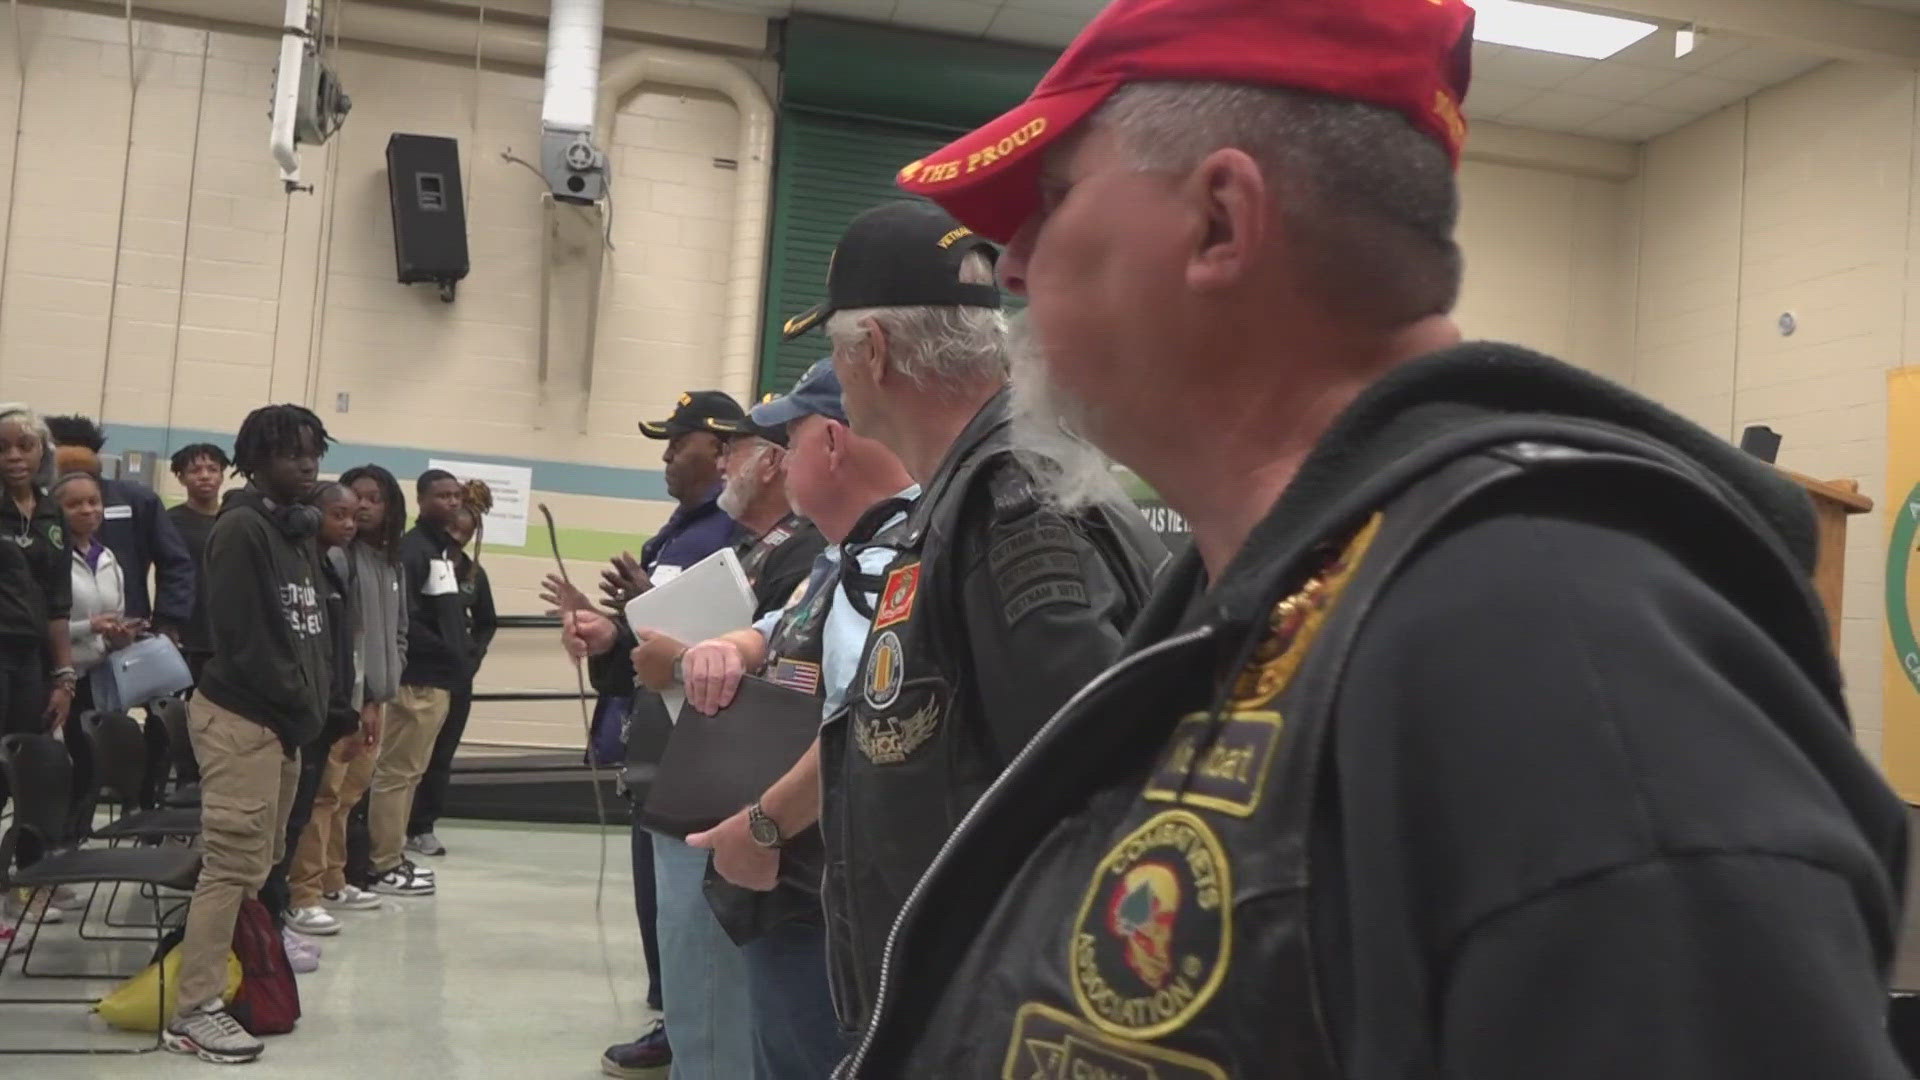 A Philip Randolph High School students in Jacksonville got the chance to meet some of their local Vietnam veterans.